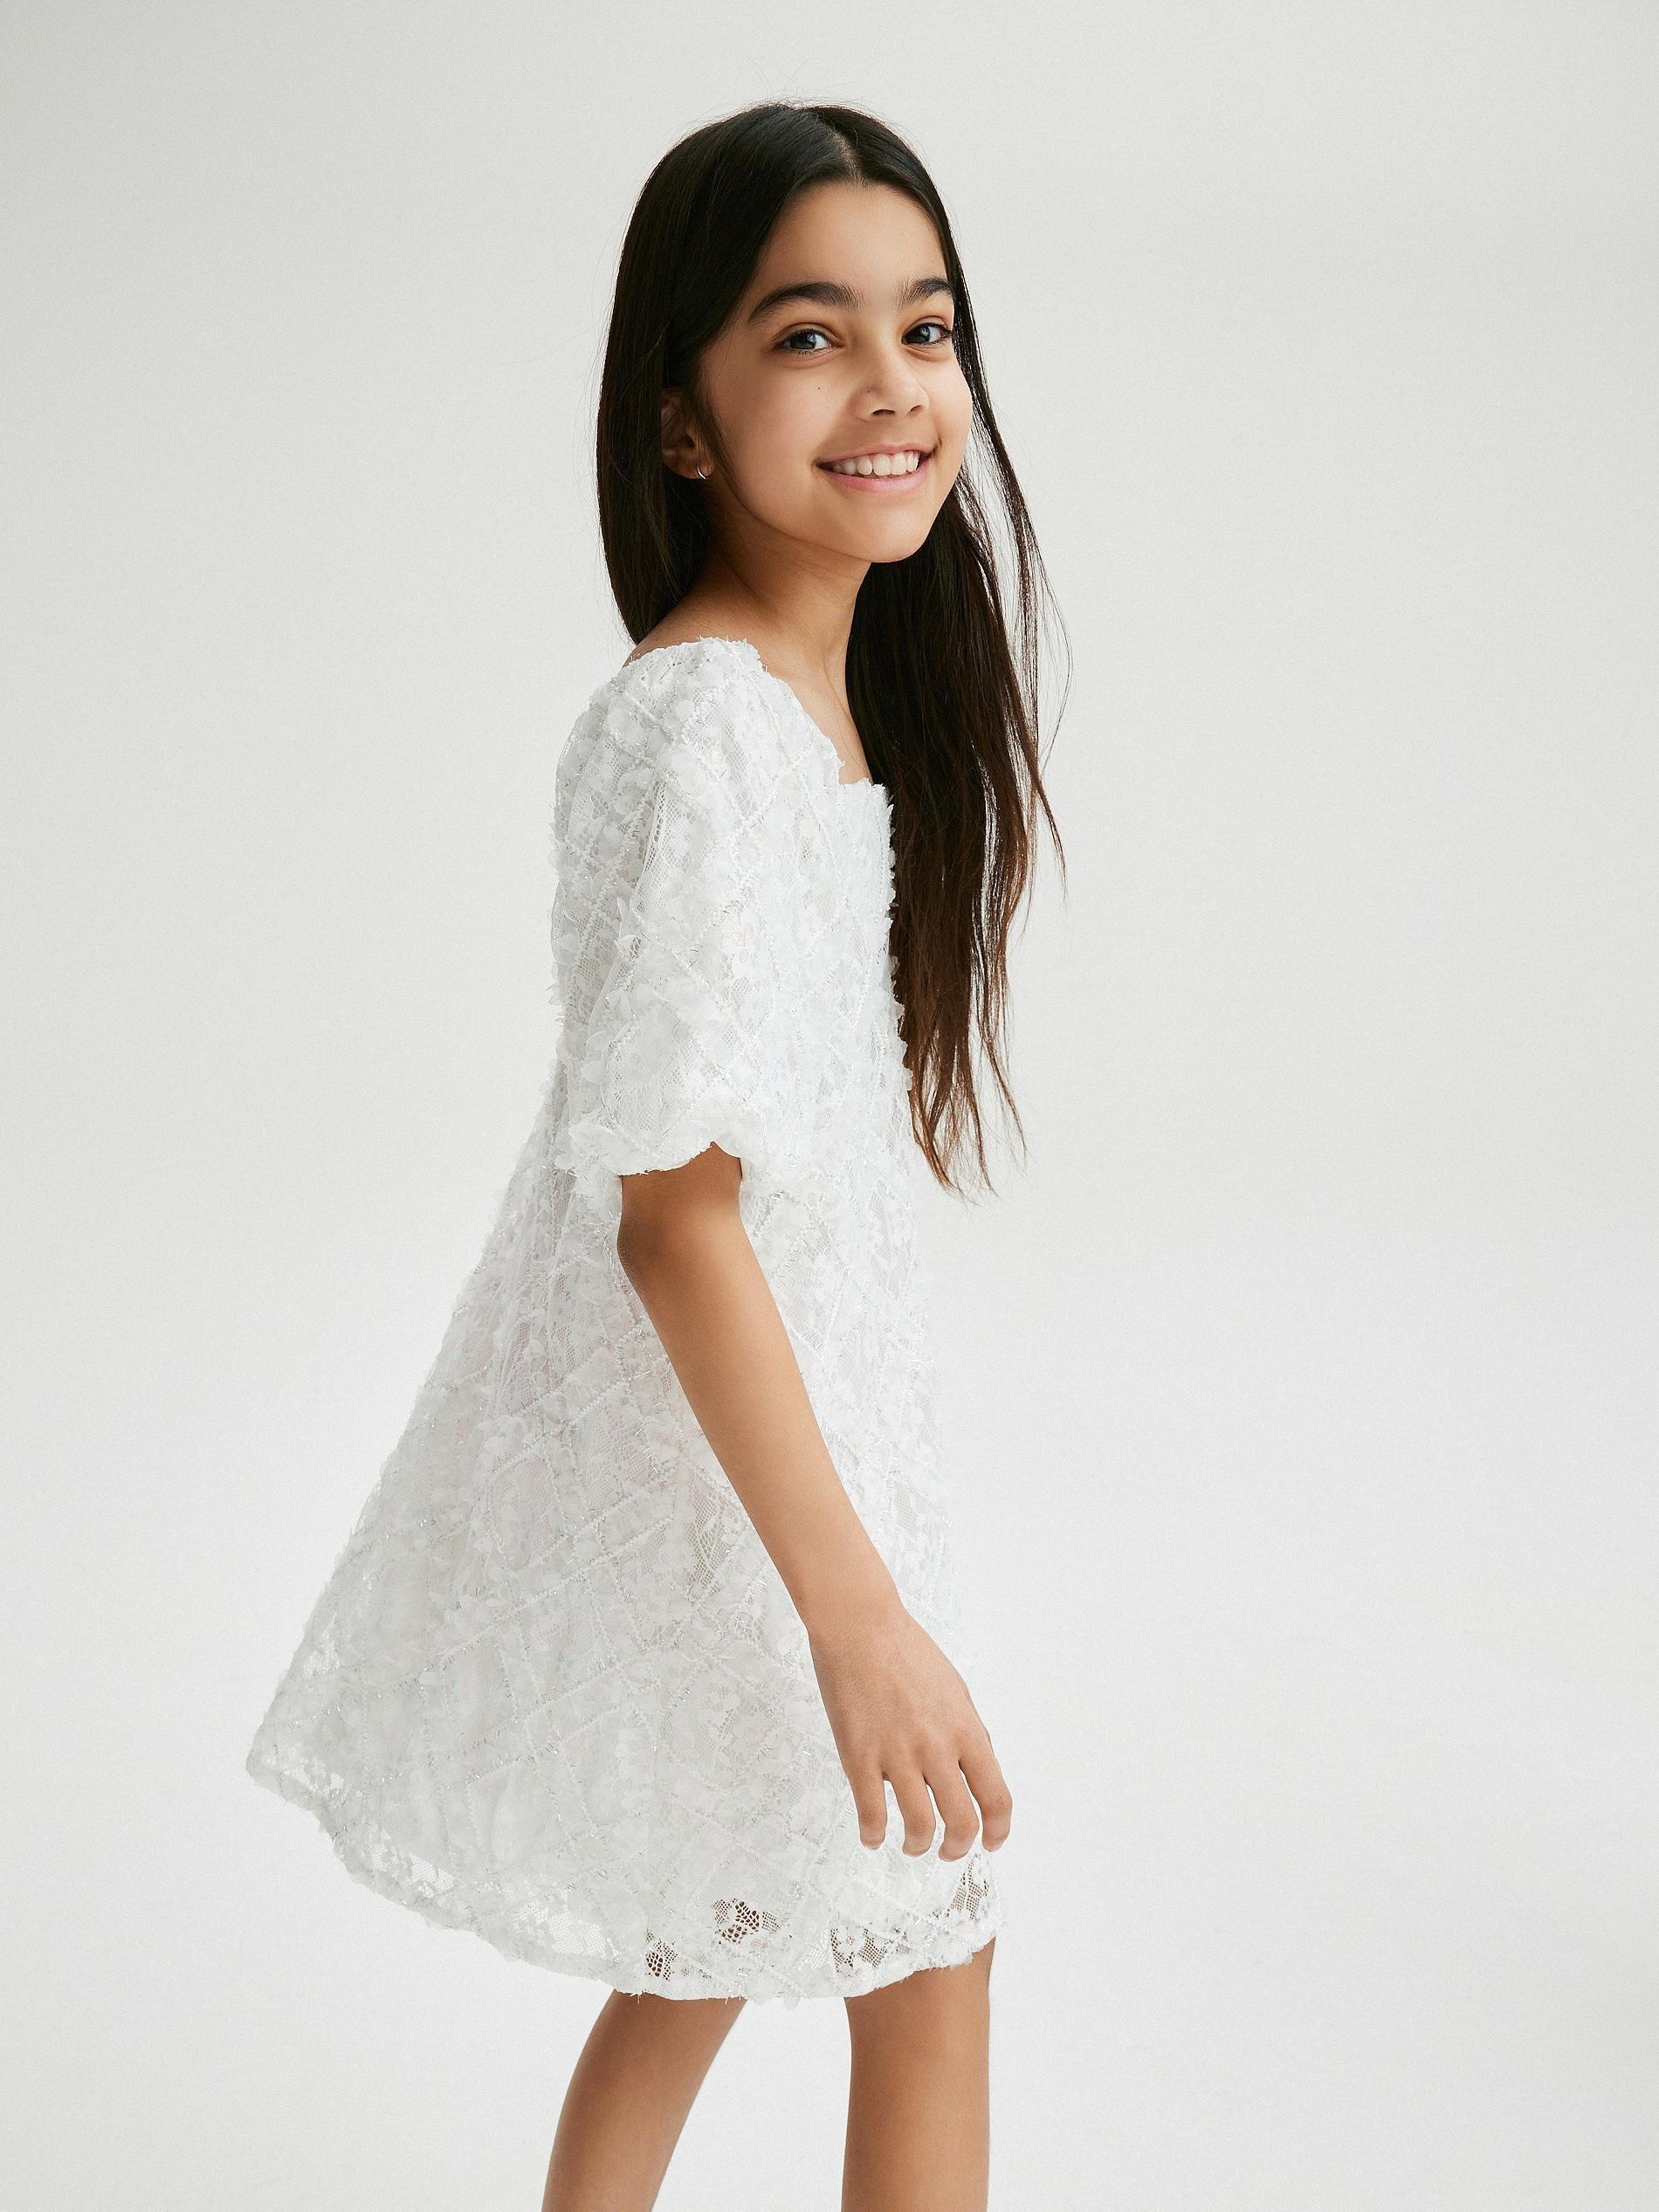 Reserved - White Lace Embroidered Dress, Kids Girls